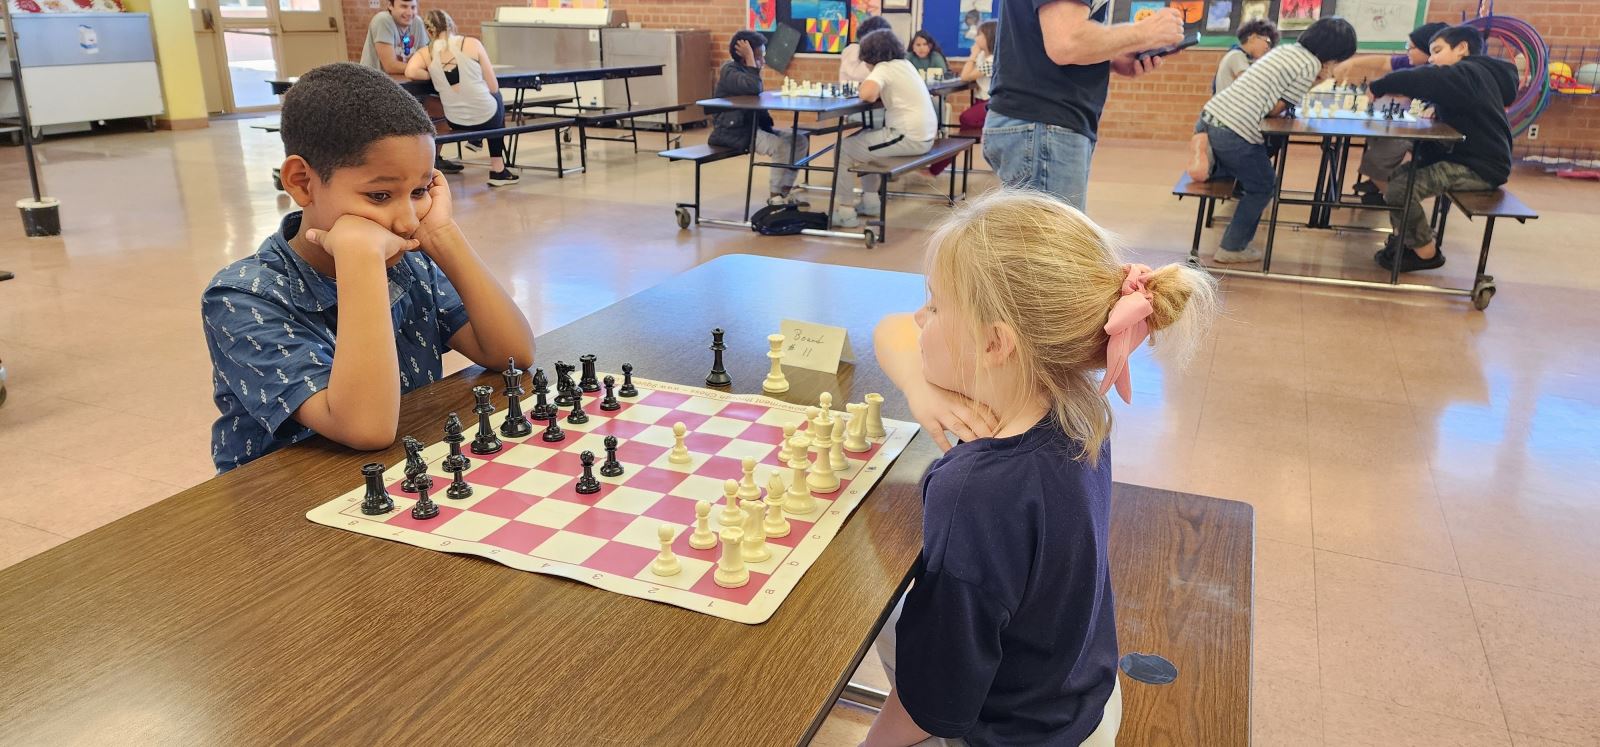 A boy and a girl play chess